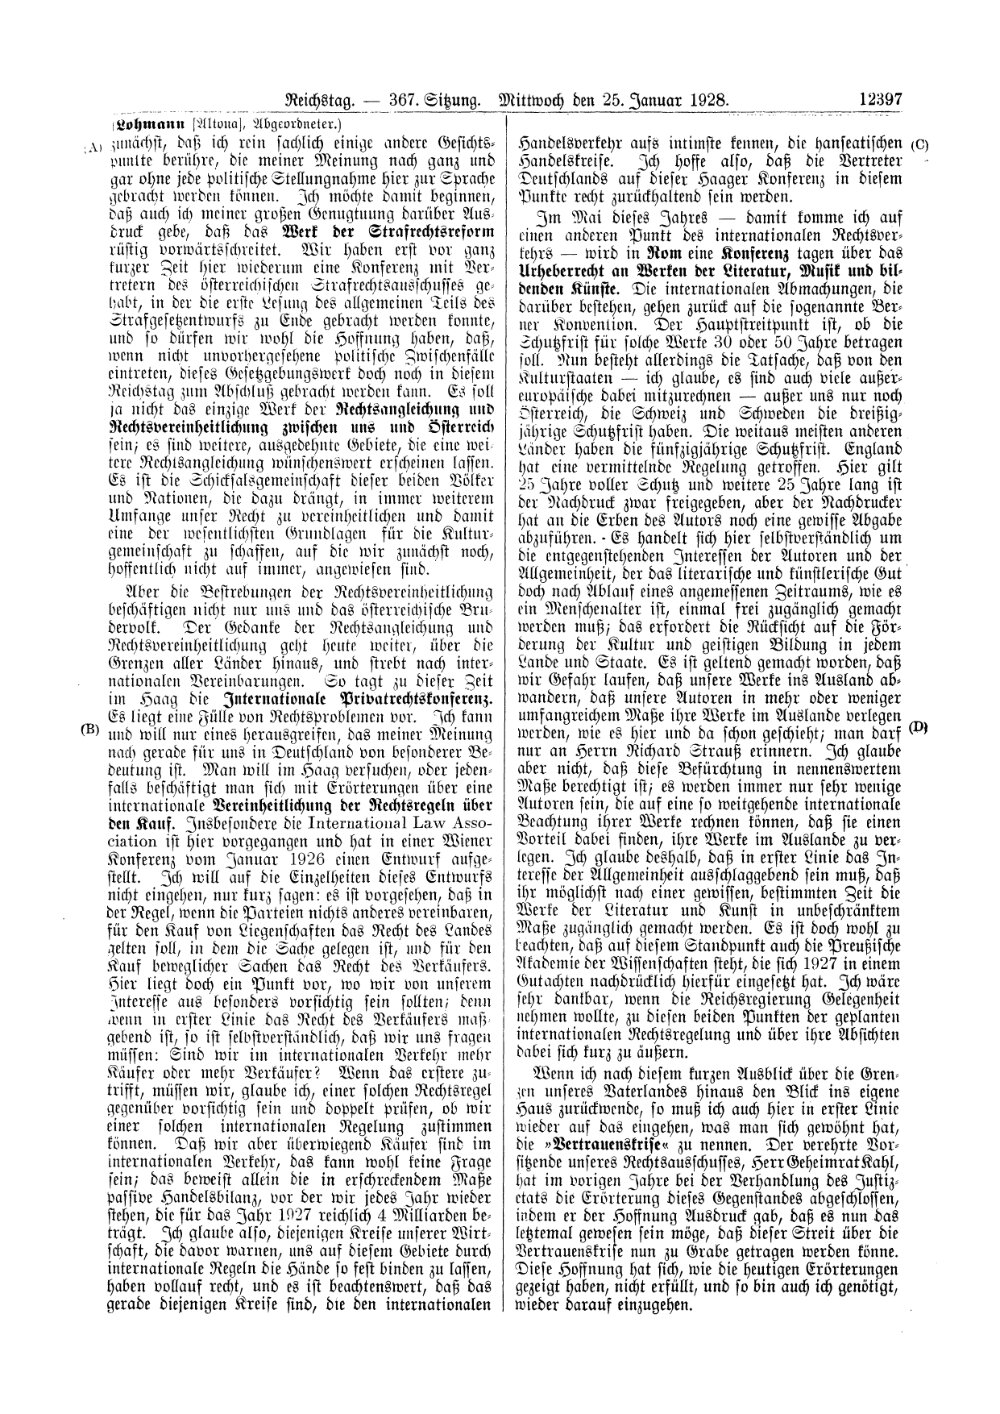 Scan of page 12397